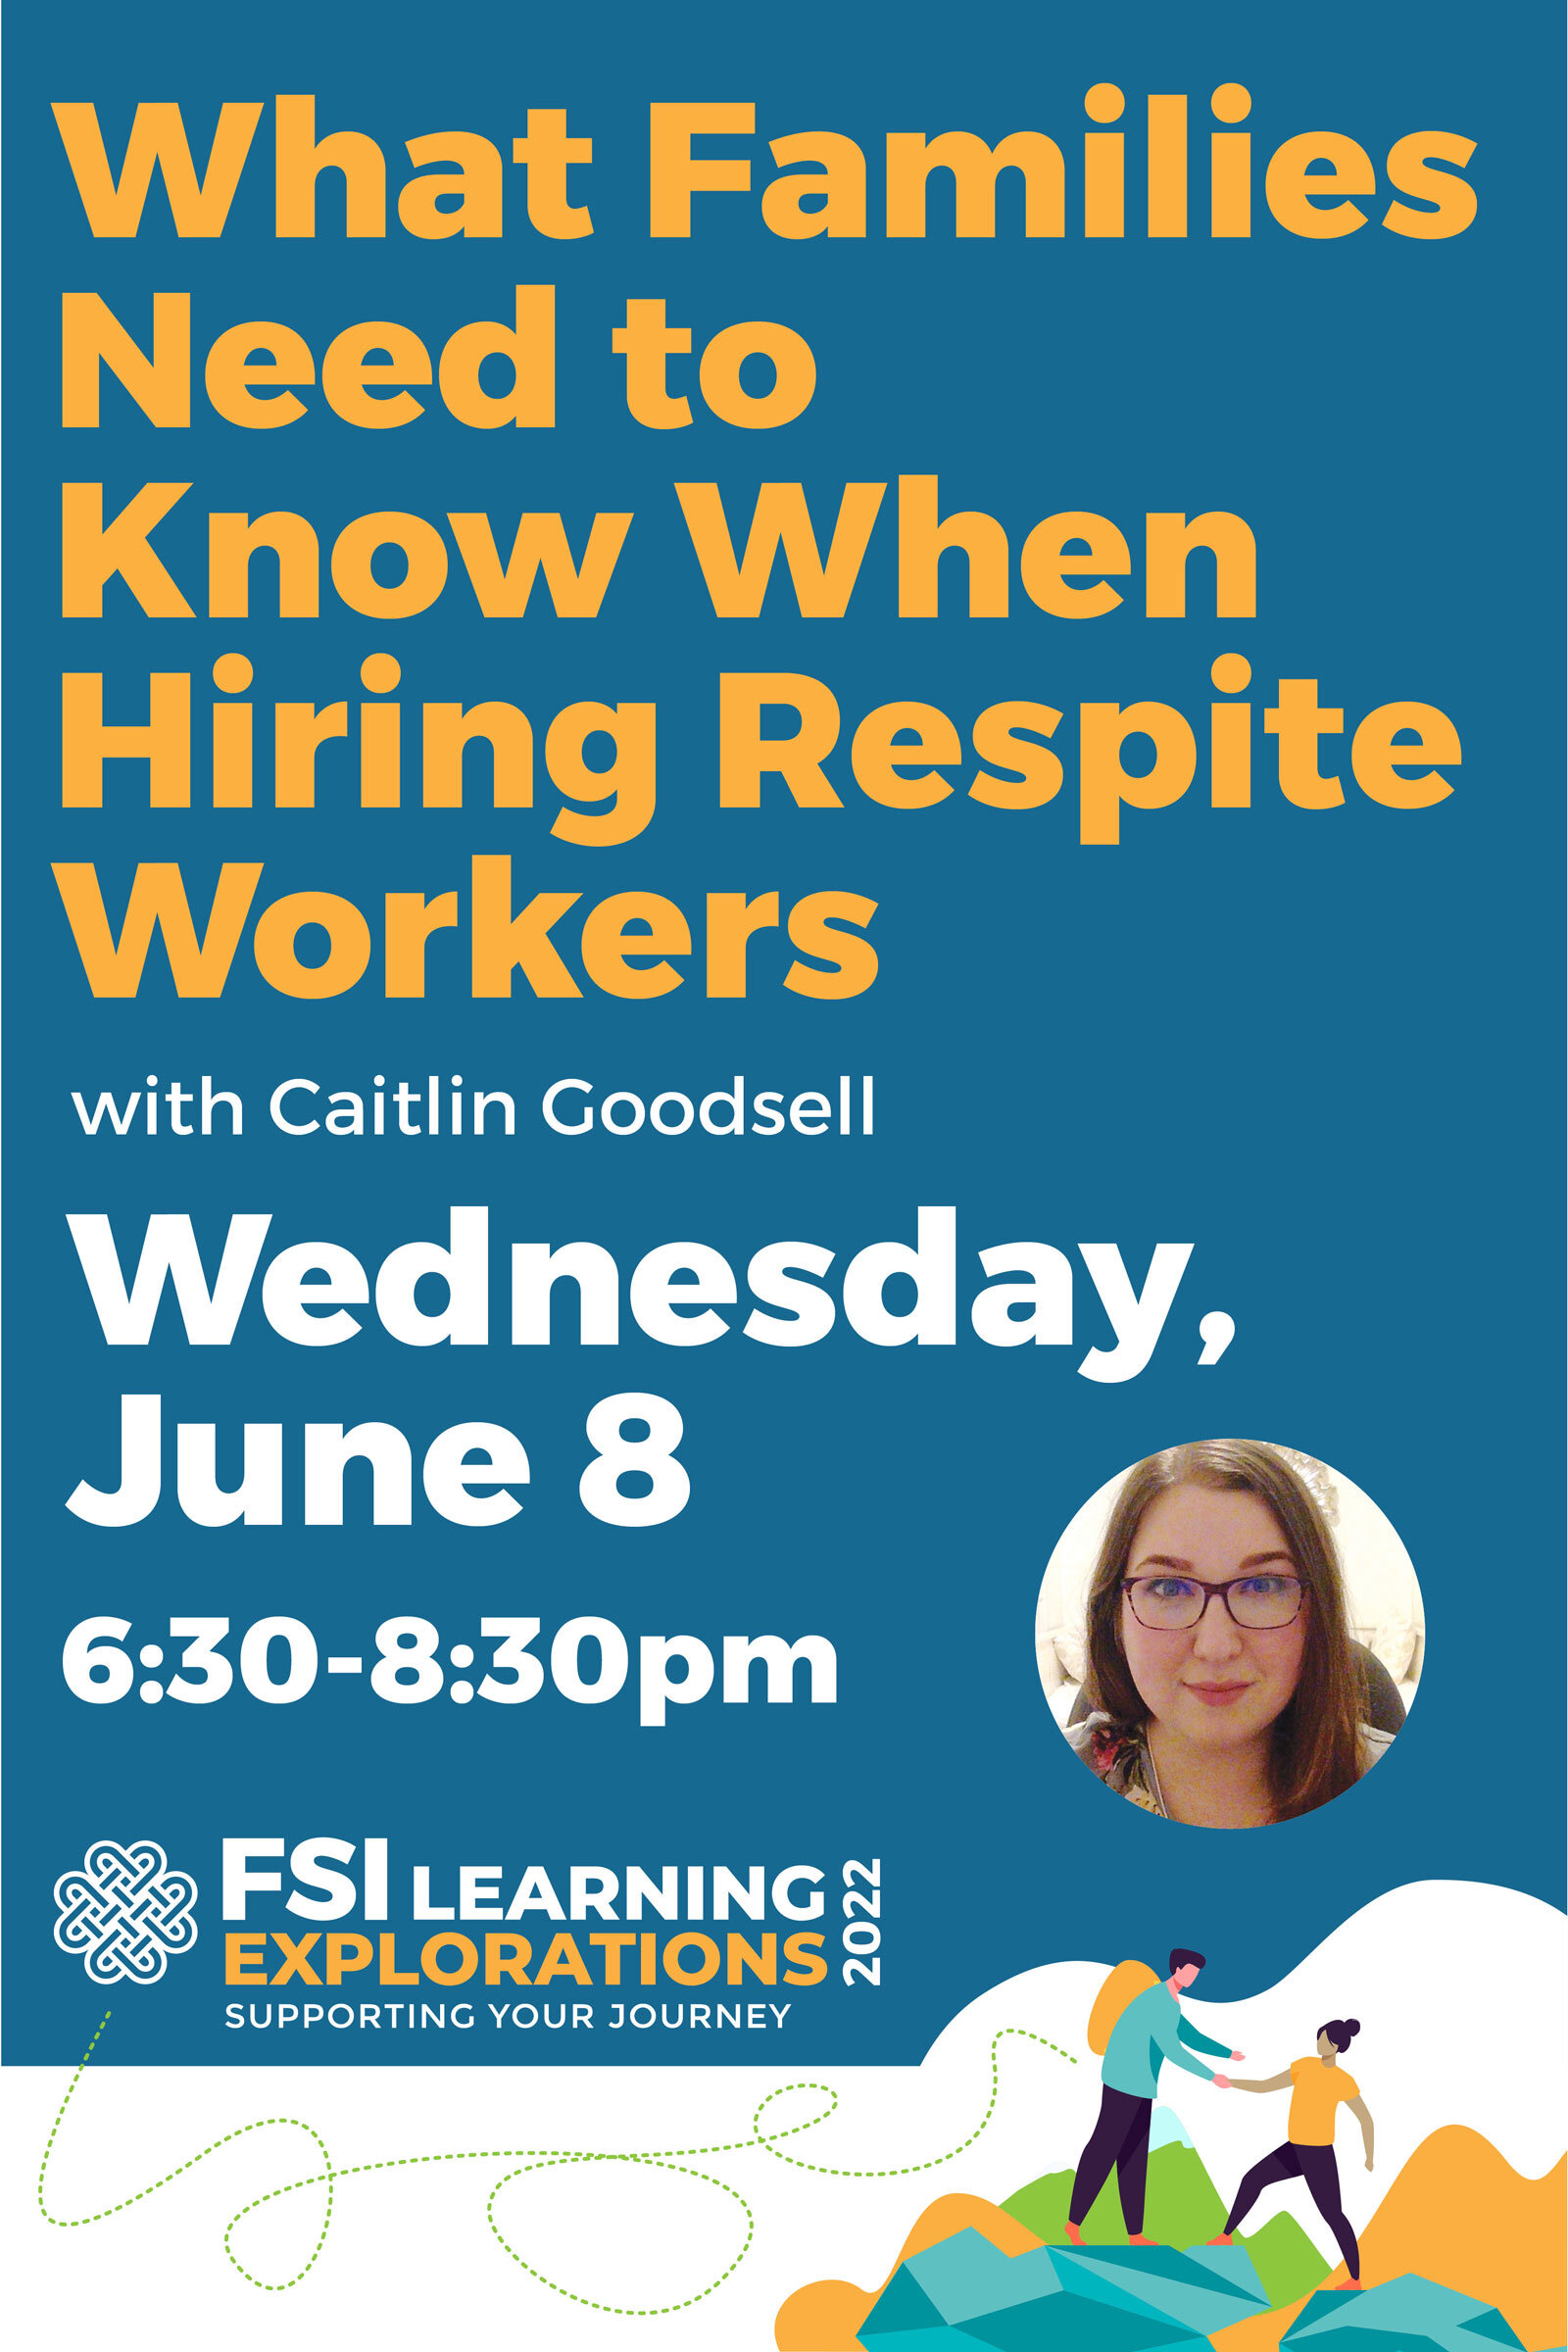 FSI Learning Explorations ~ What Families Need to Know When Hiring Respite Workers